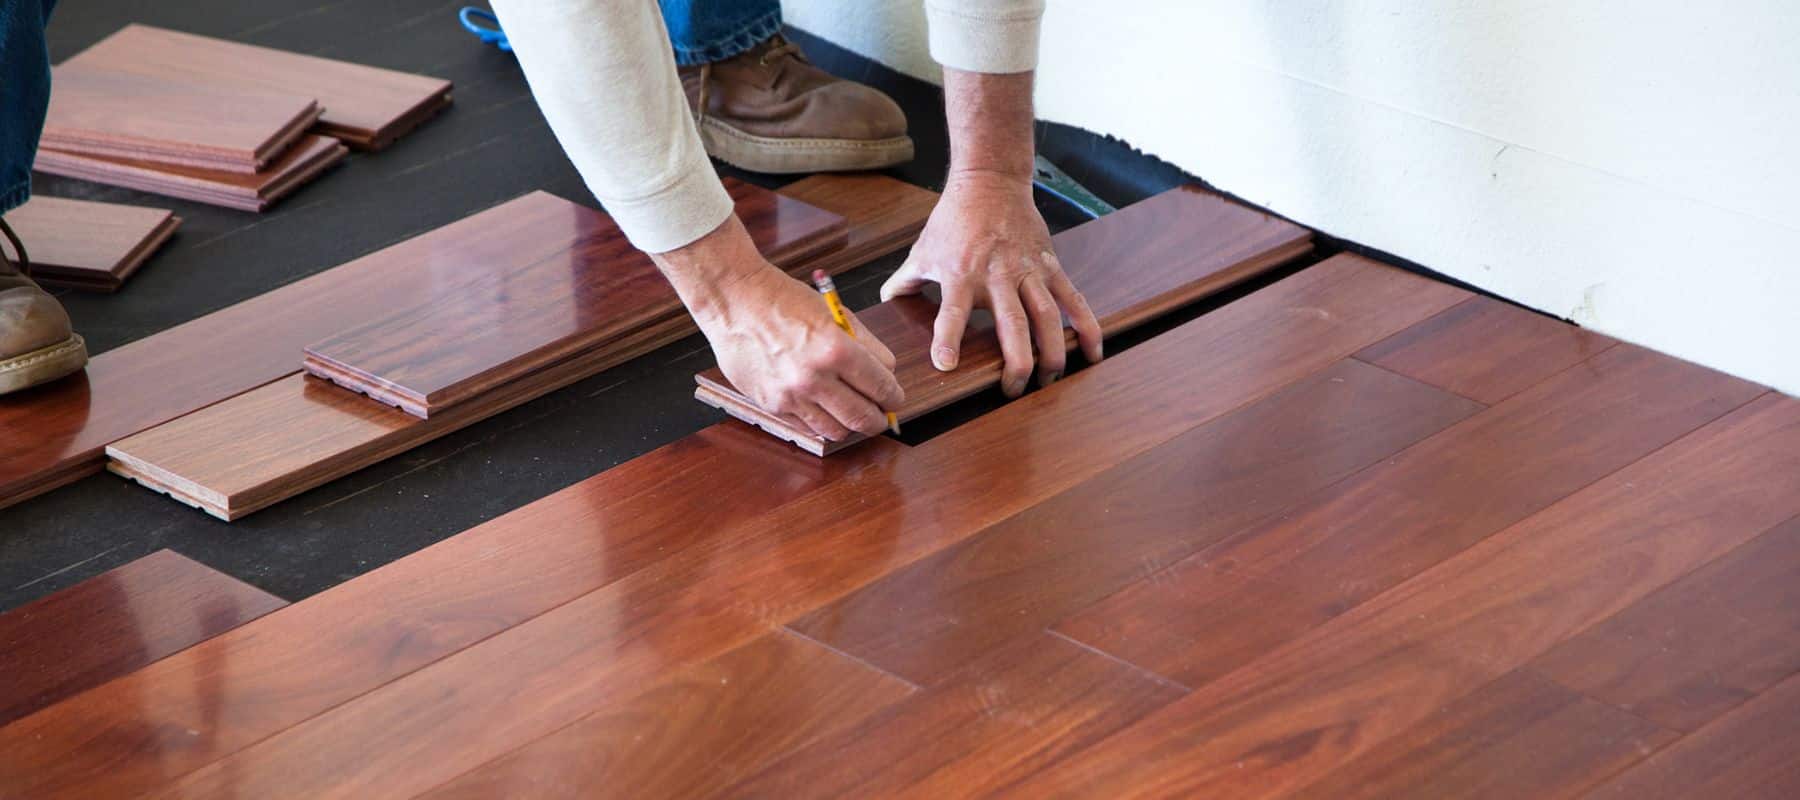 A person is kneeling on the floor, installing dark wood laminate flooring in a room. The individual's hands are visible, marking a piece of the laminate with a pencil to ensure precise fitting. This task indicates a home improvement project focusing on flooring installation